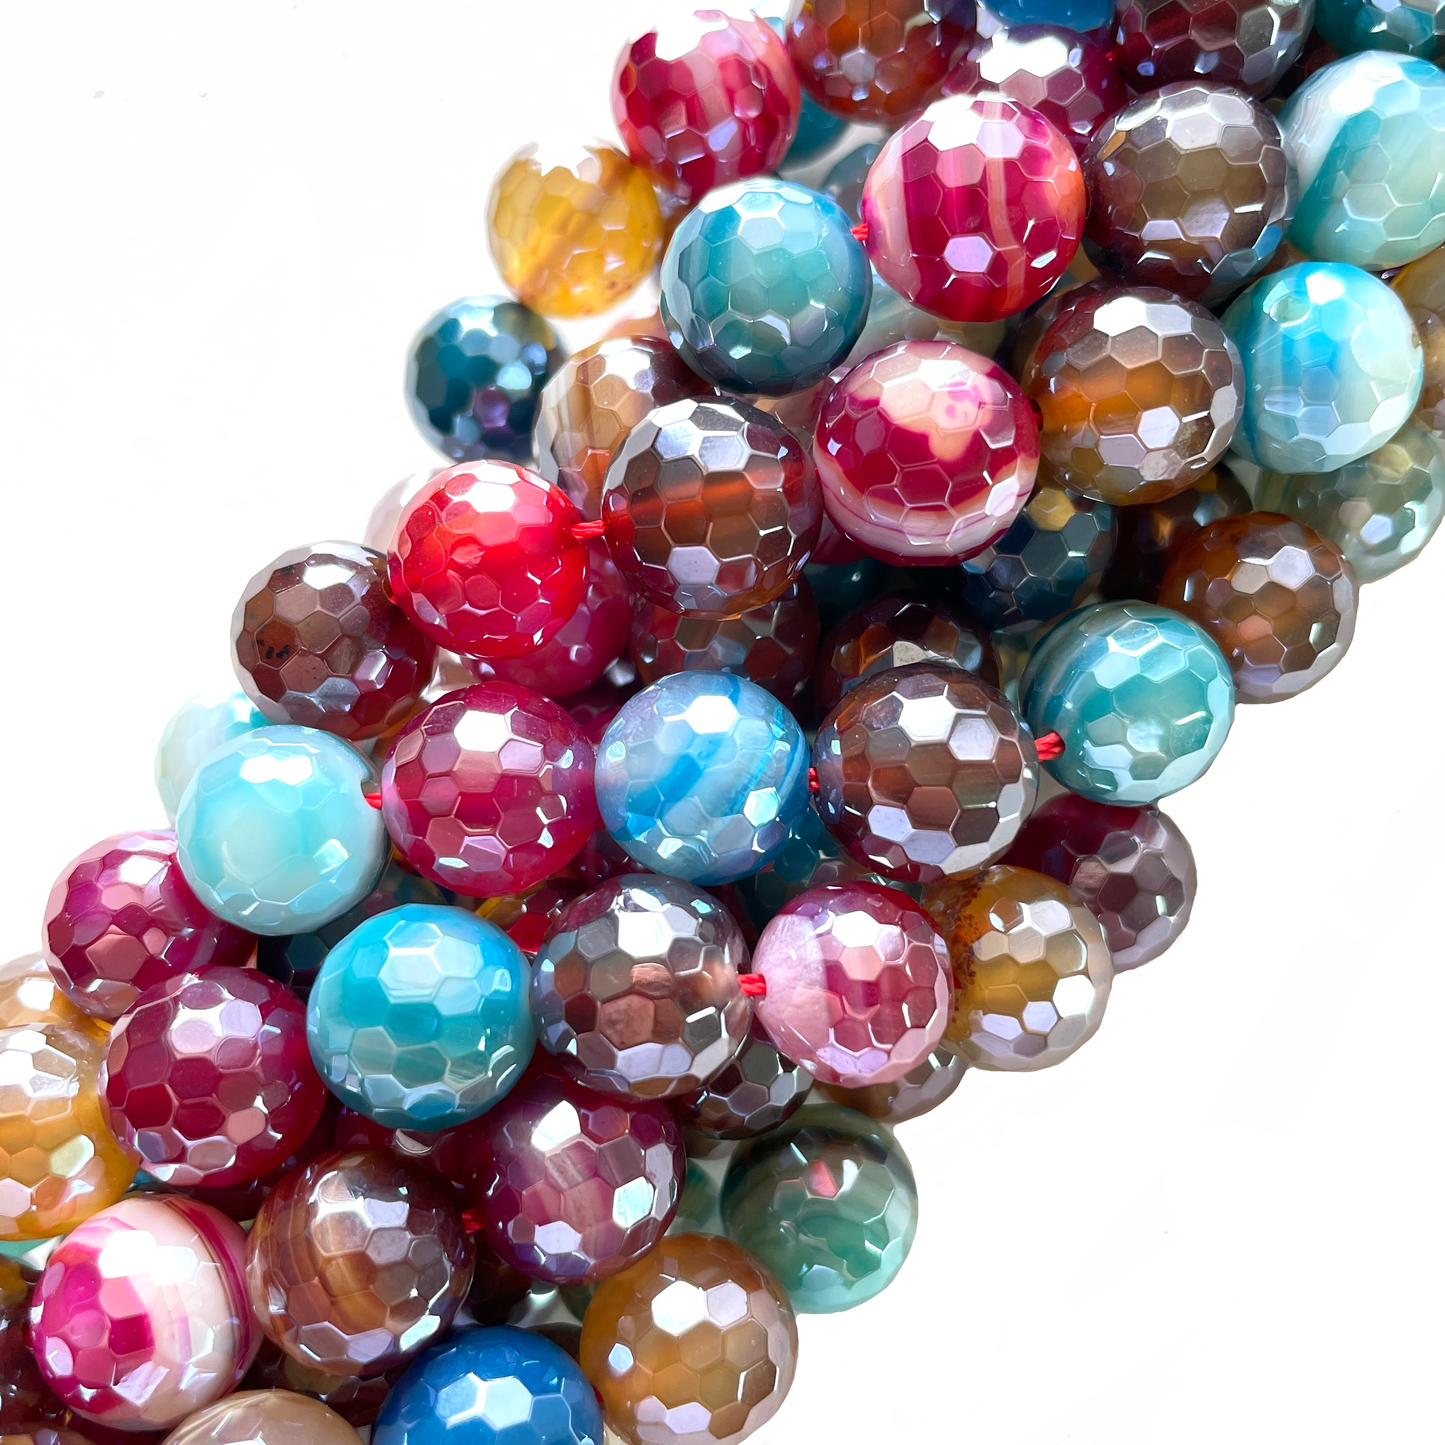 10, 12mm Electroplated Multicolor Banded Agate Stone Faceted Beads-Grade A Premium Quality Electroplated Beads 12mm Stone Beads New Beads Arrivals Premium Quality Agate Beads Charms Beads Beyond